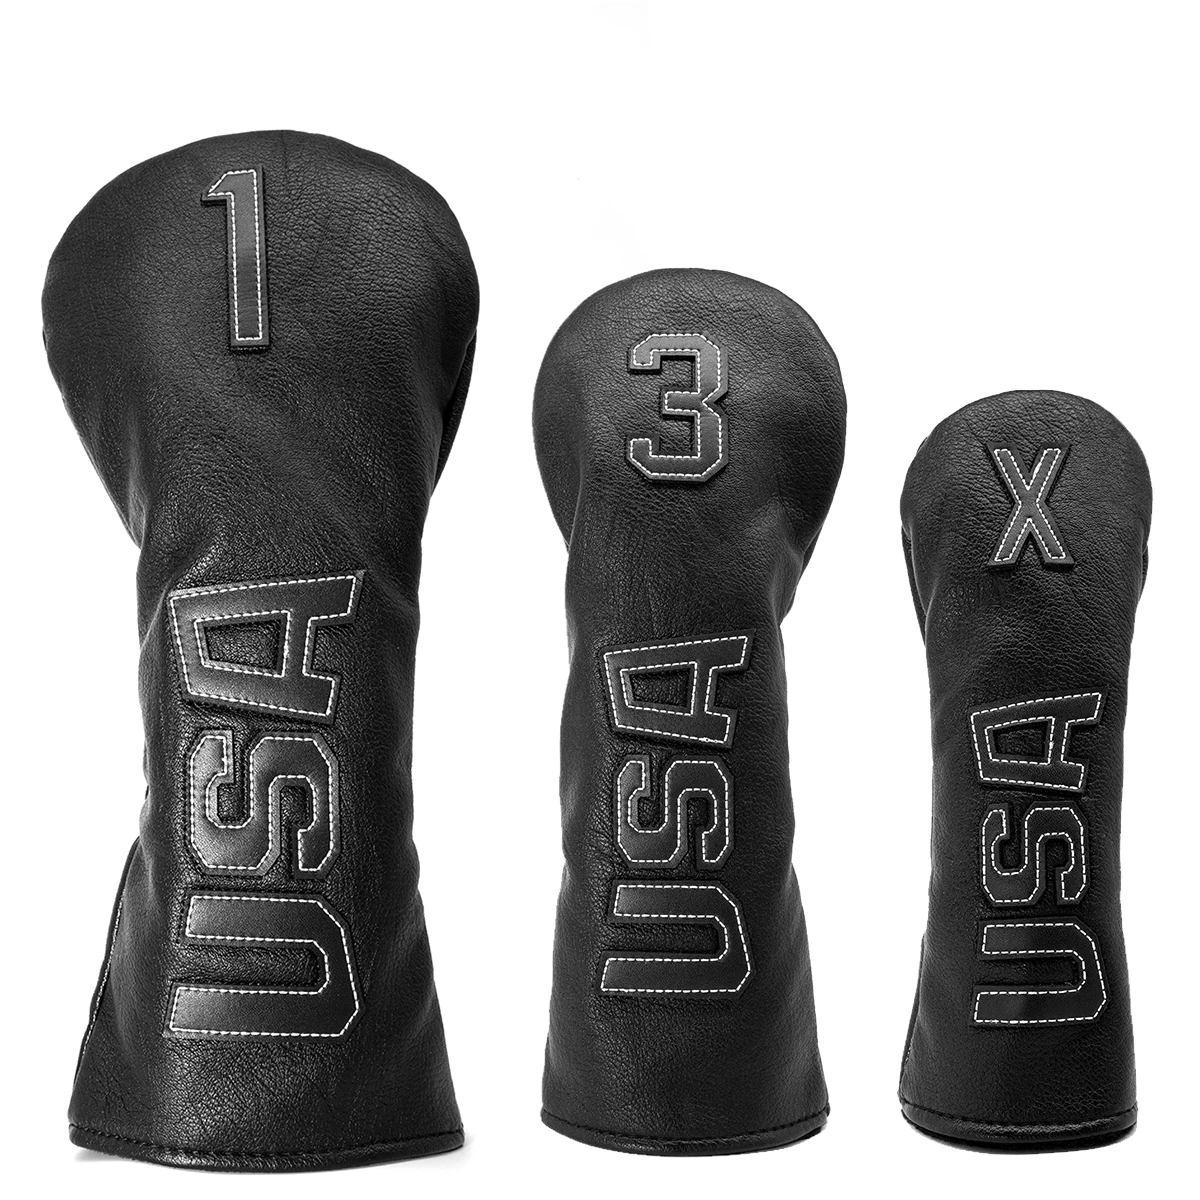 

Golf Club Headcover Set USA Amarica Golf Wood Cover 1 3 5 Driver Fairway Rescue Hybrid Headcovers with Tag